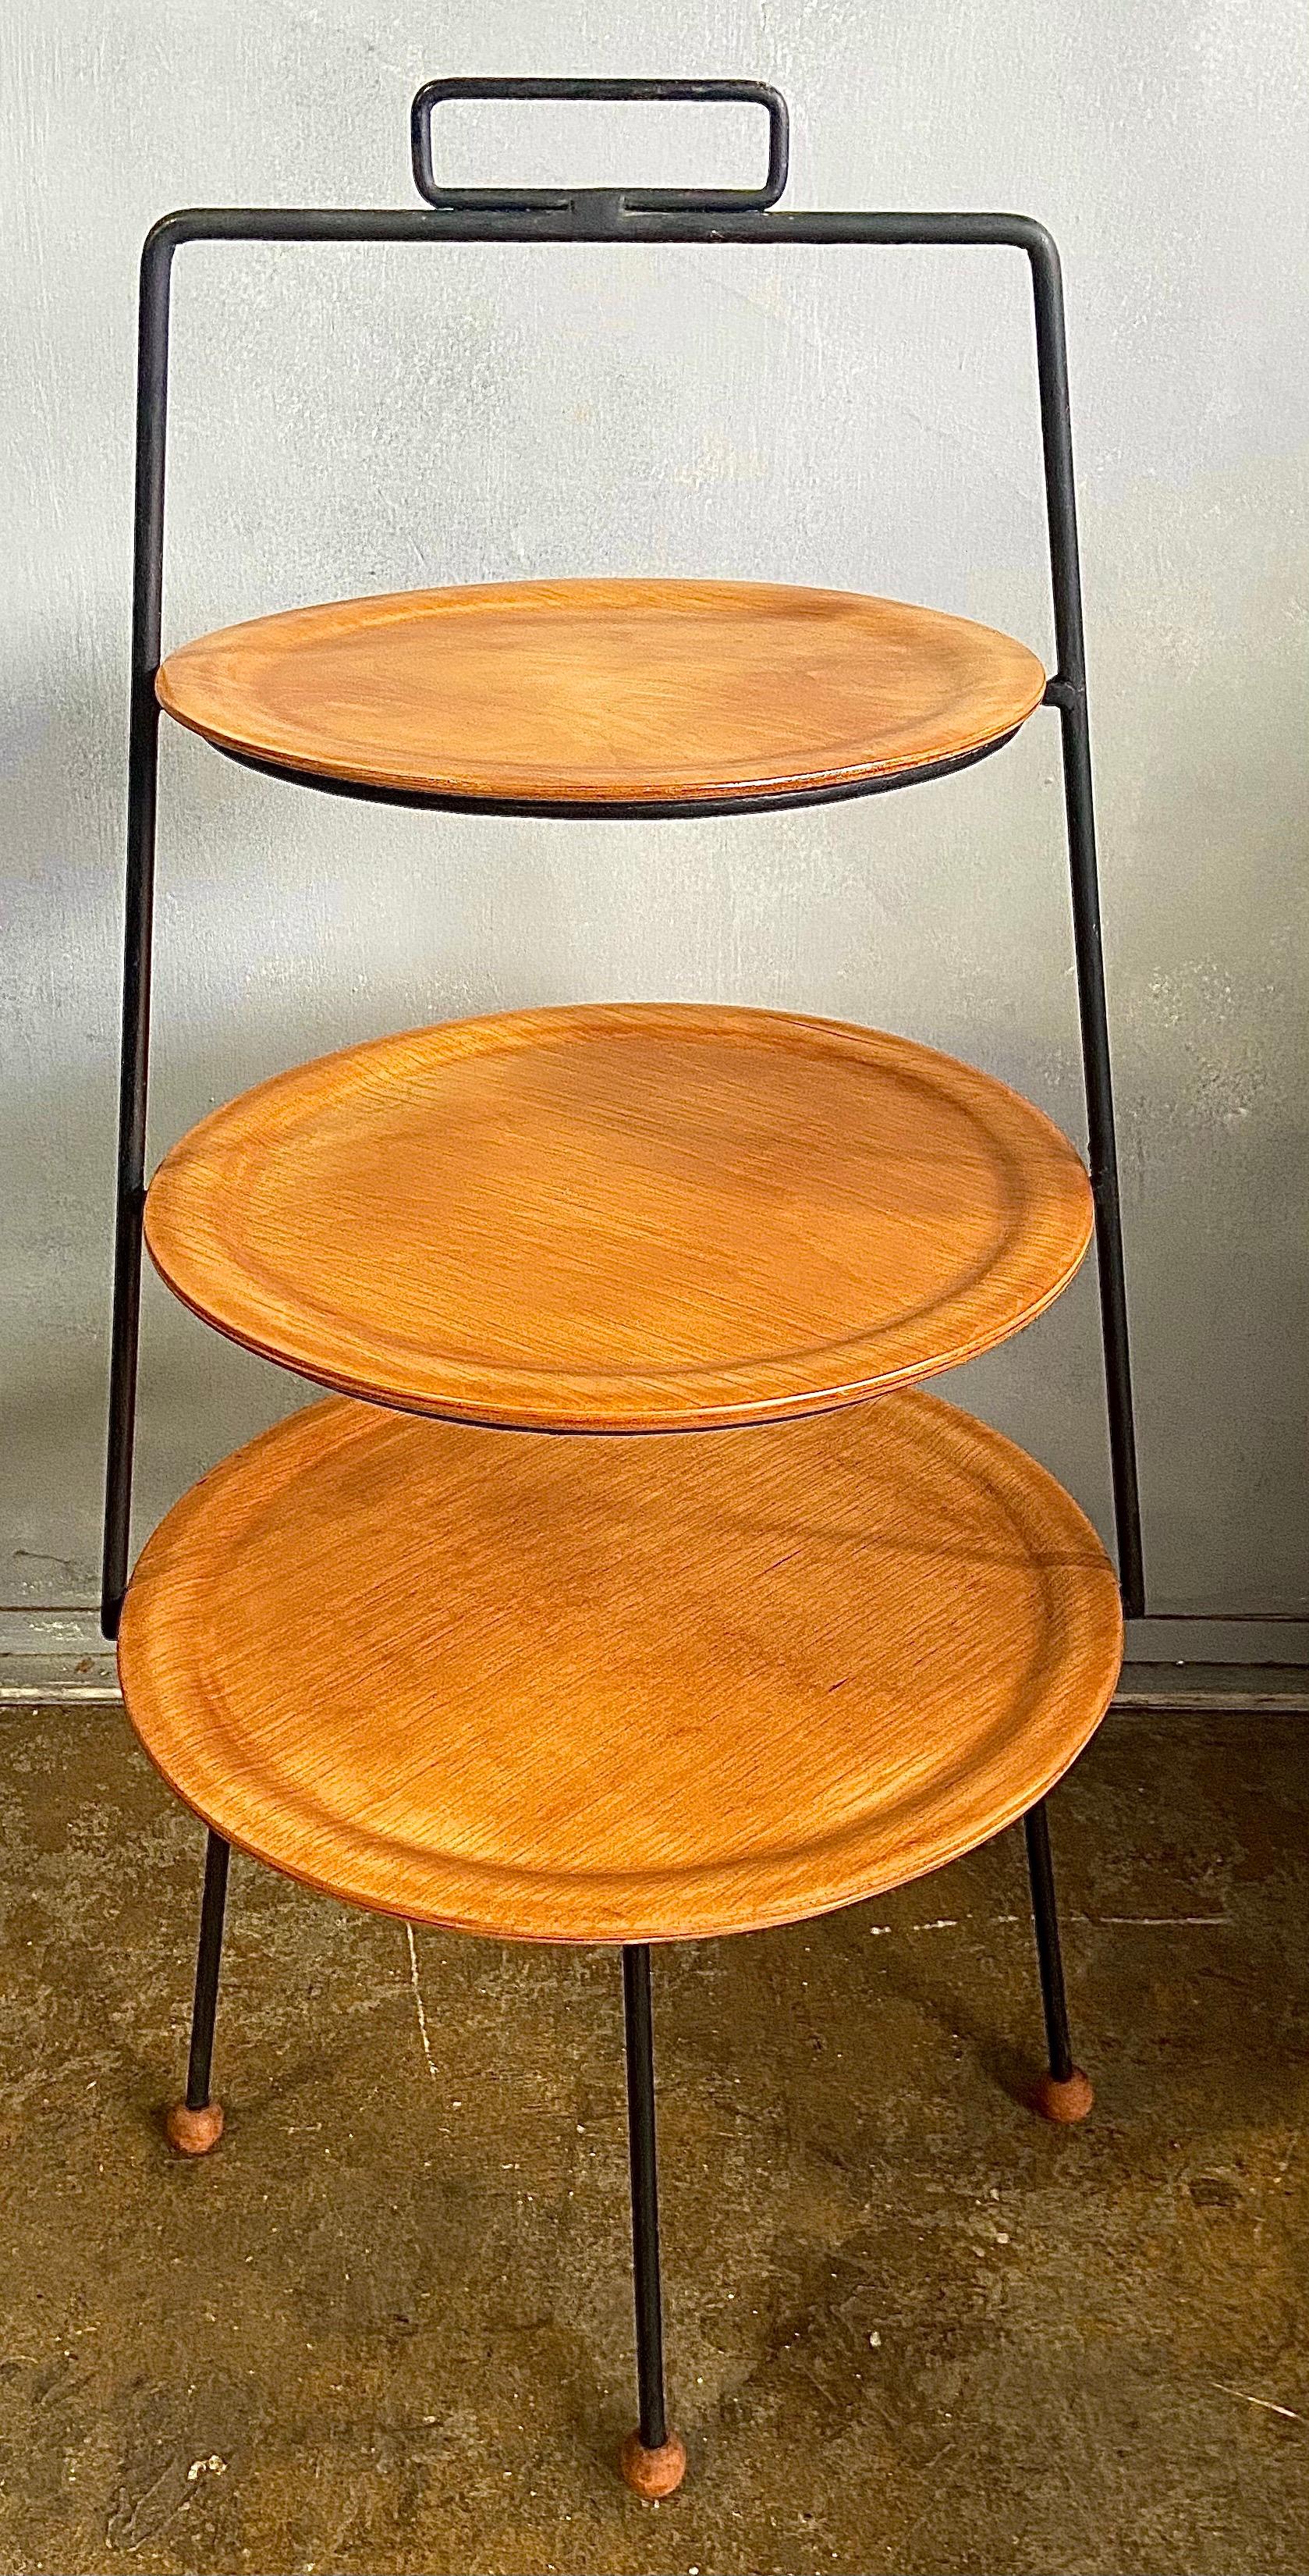 For your consideration is one rare vintage three tiered stand designed by Tony Paul for Woodlin-Hall of NYC, circa 1950s. Featuring bent plywood plates on a black iron frame with wood ball feet. This stand is very versatile and can be used as a